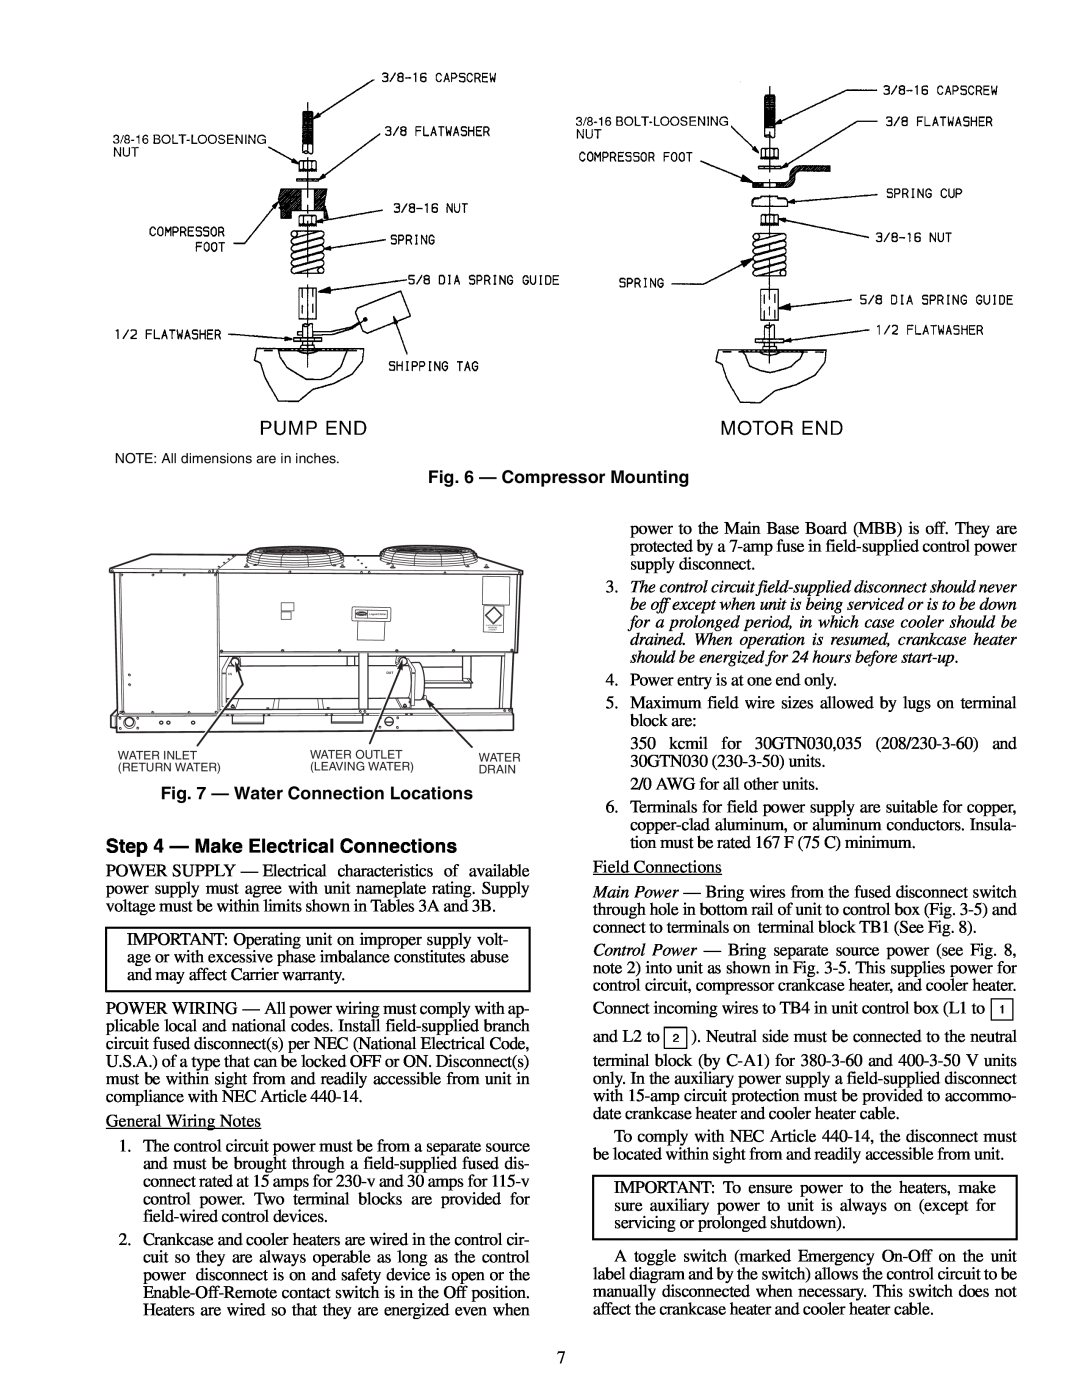 Carrier 30GTN015-035 installation instructions Make Electrical Connections, Compressor Mounting, Water Connection Locations 